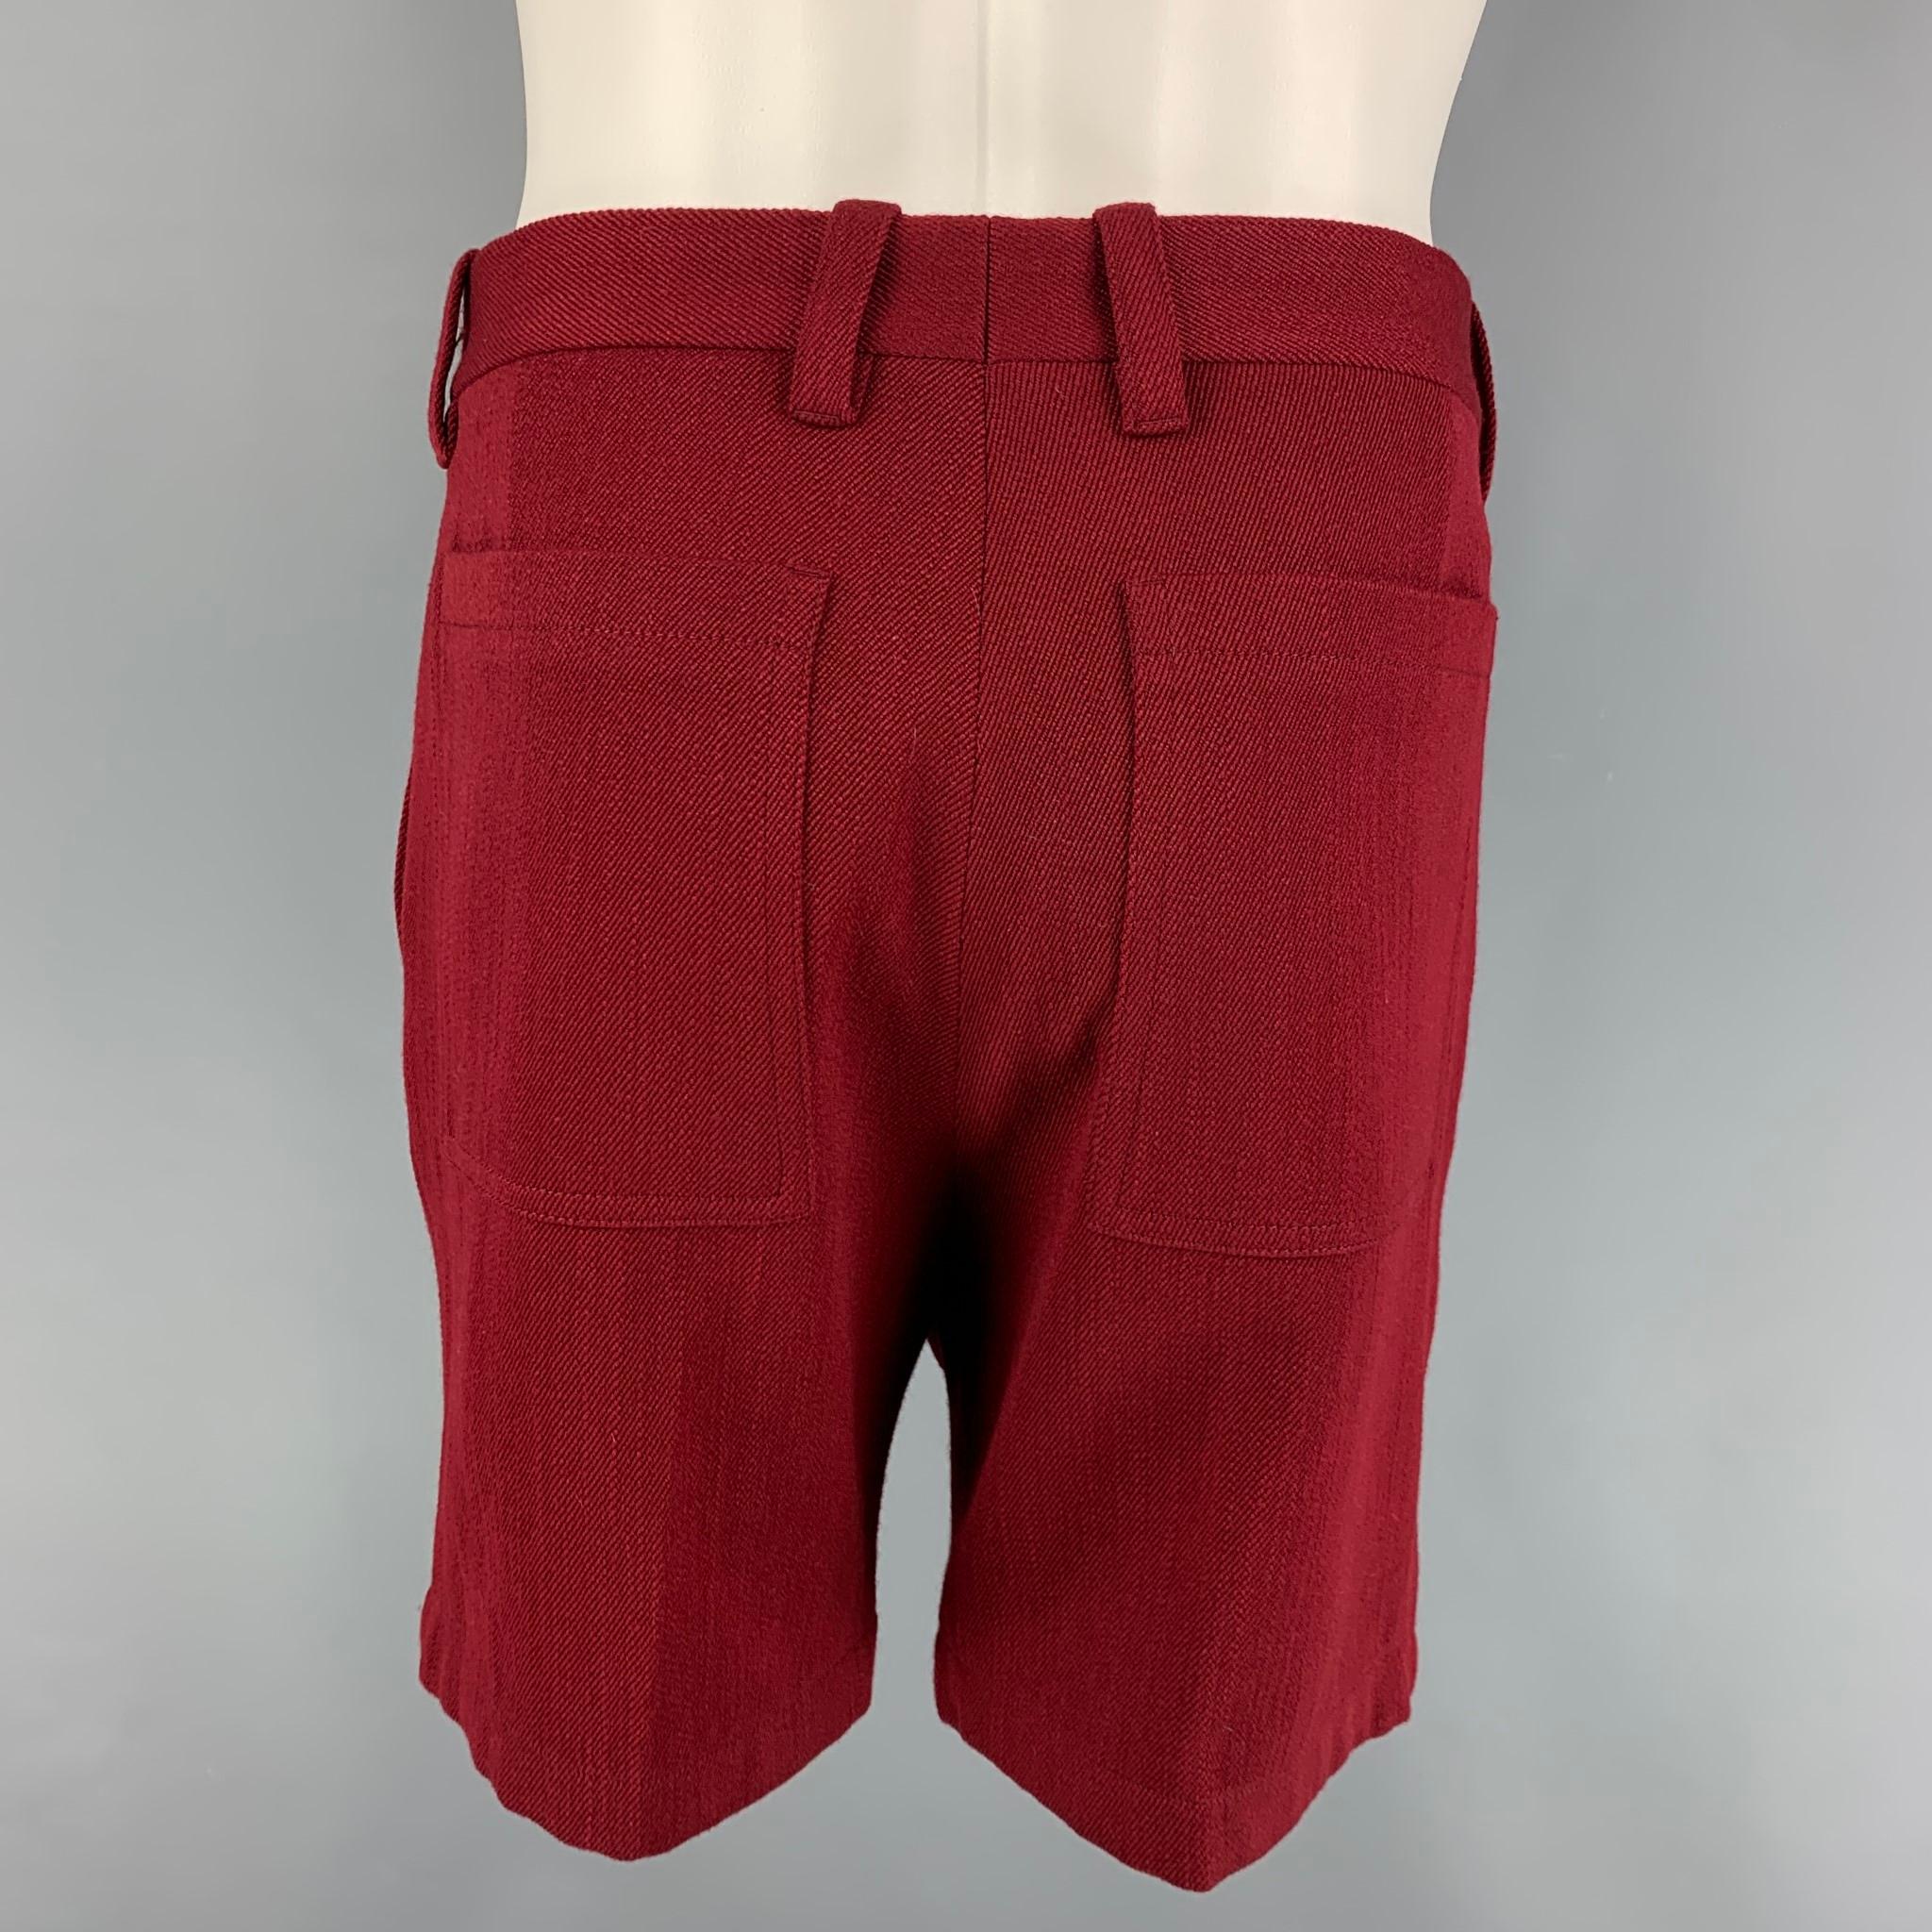 MARNI shorts comes in a burgundy wool  featuring a flat front and a button fly closure. Made in Italy. 

Very Good Pre-Owned Condition.
Marked: 48

Measurements:

Waist: 32 in.
Rise: 14 in.
Inseam: 7 in. 